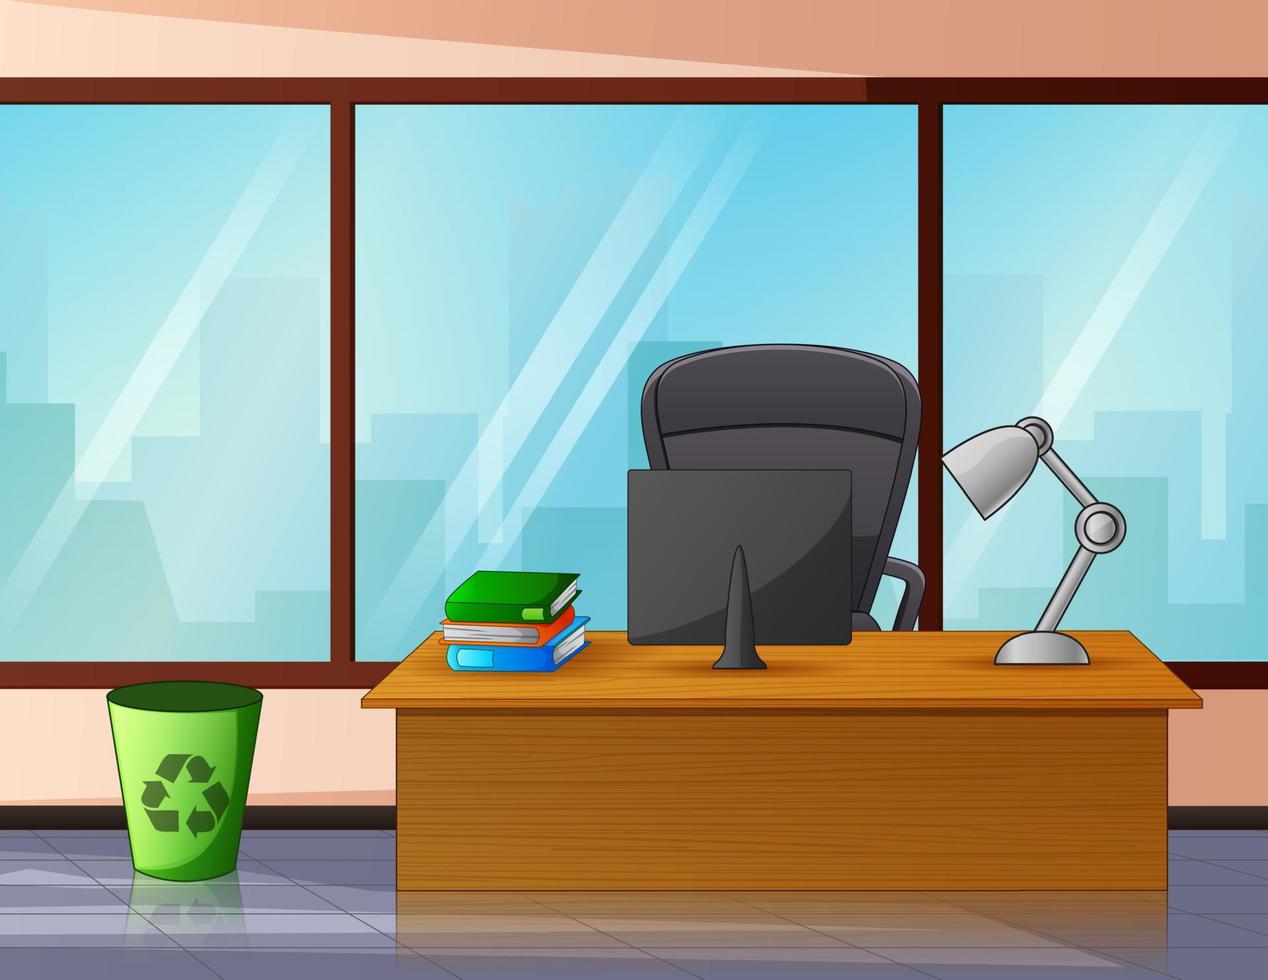 Cartoon workplace room interior with computer illustration vector